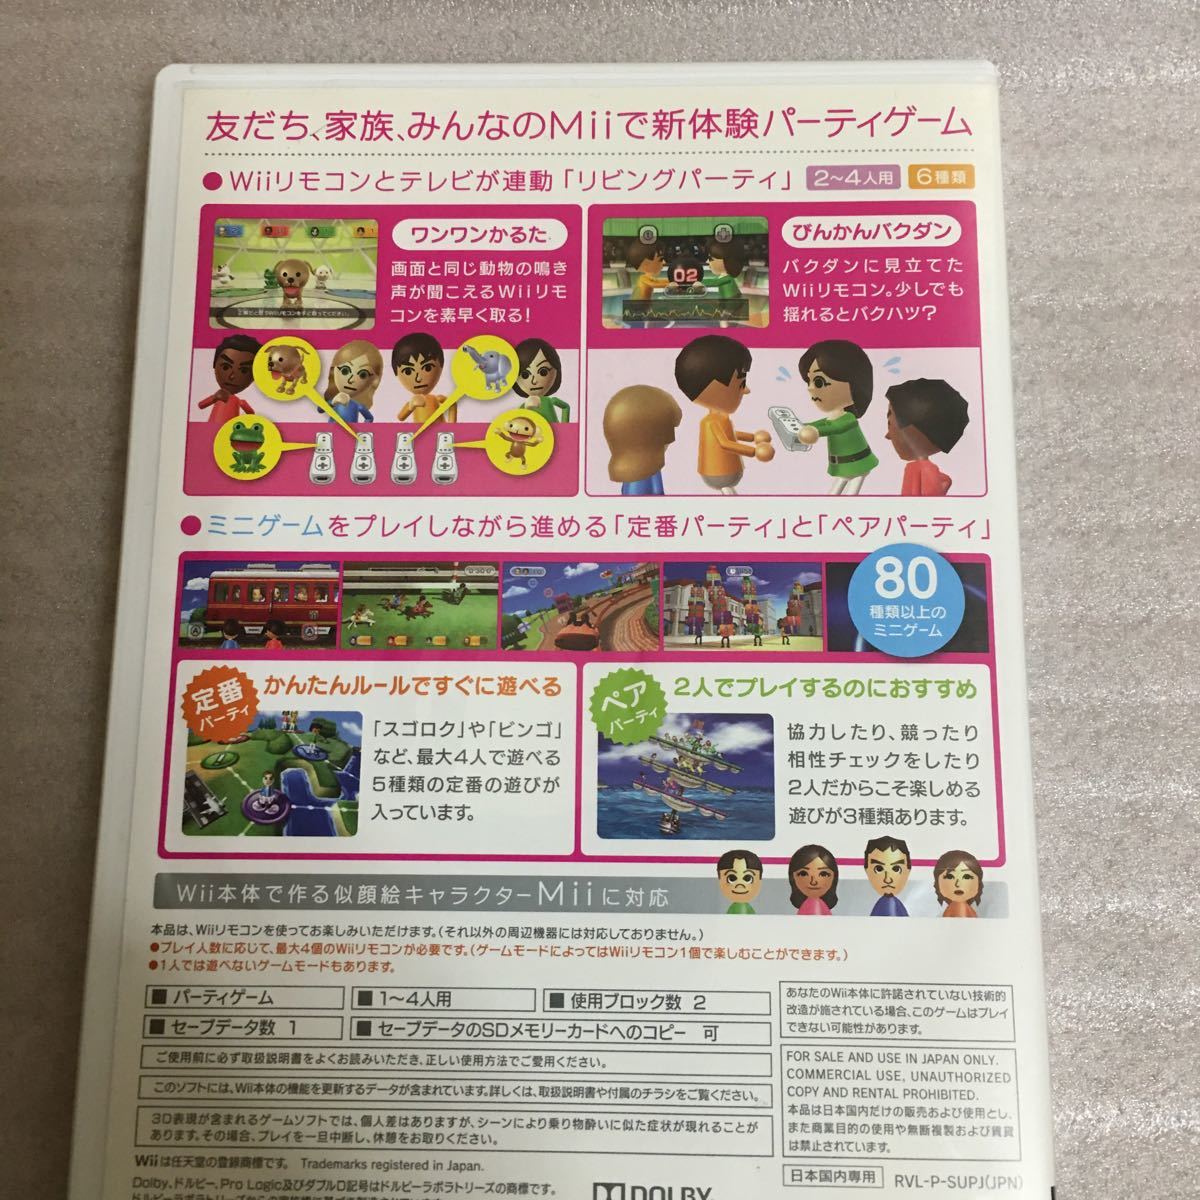 Wiiソフト Wii Party Wiiパーティ